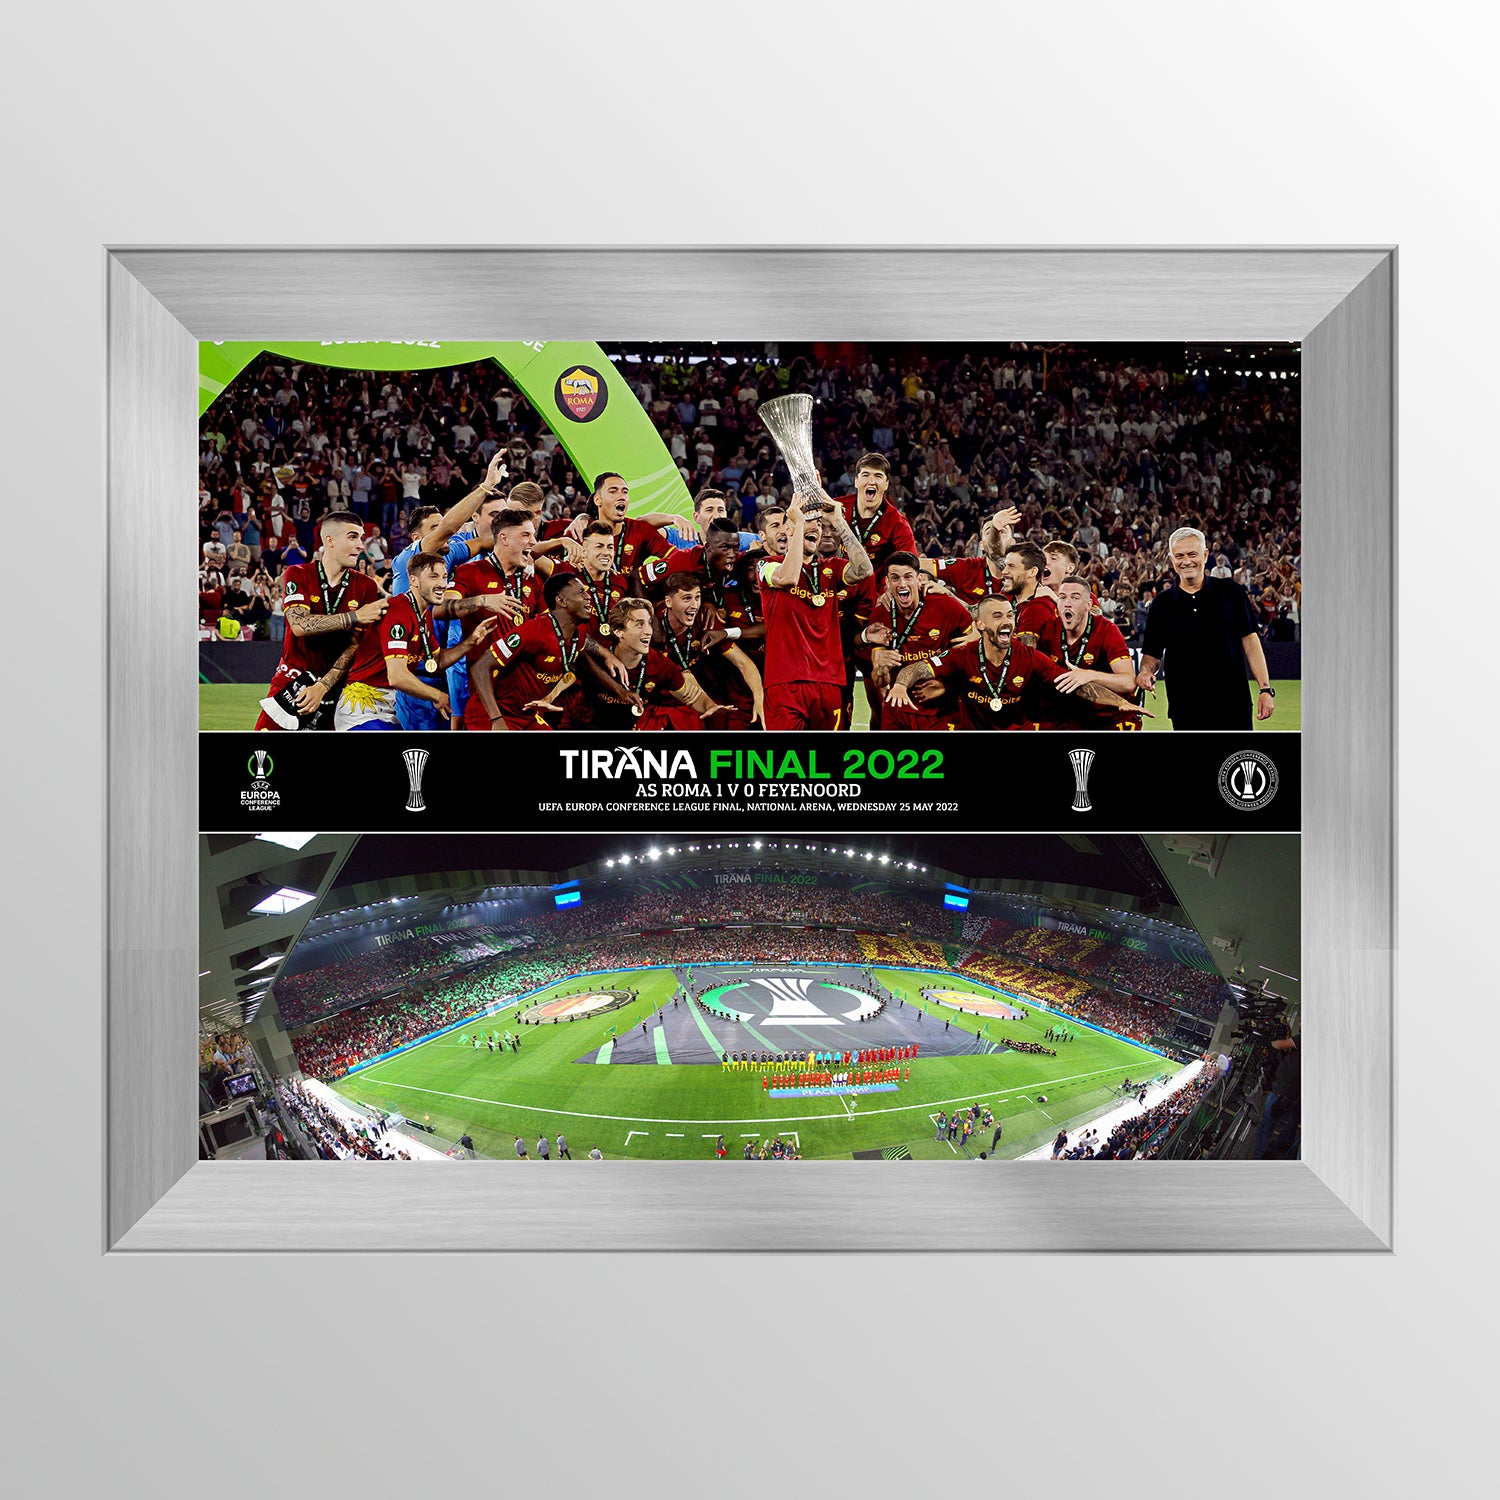 Tirana Celebration Montage featuring trophy lift and Panoramic Line Up 16x12 - Conference League Final  UEFA Club Competitions Online Store